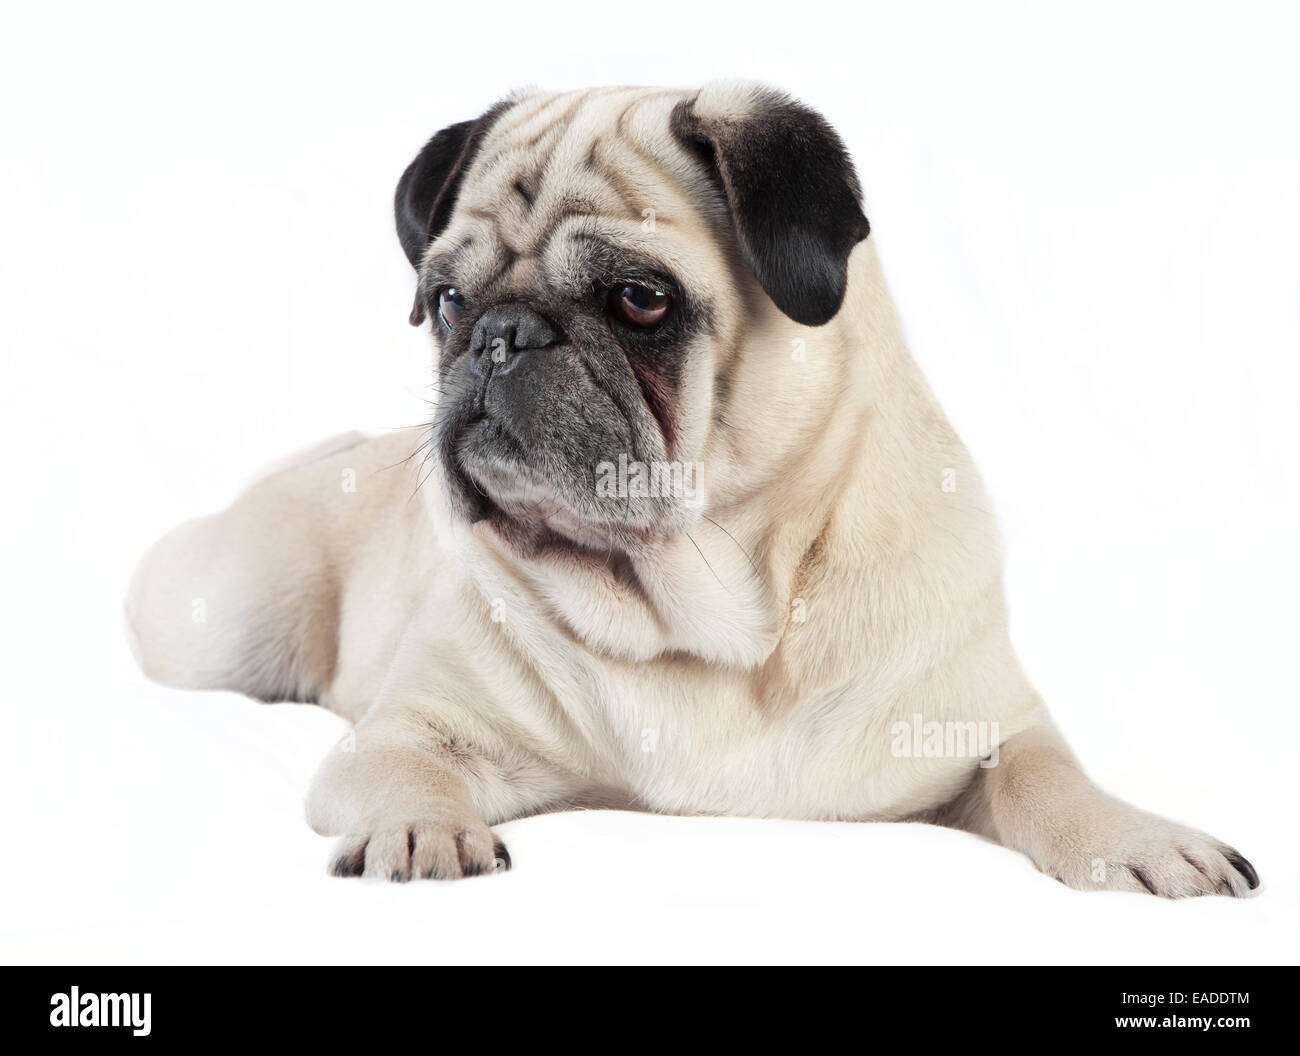 Pug male dog with cream colored fur lying on a white blanket Stock Photo